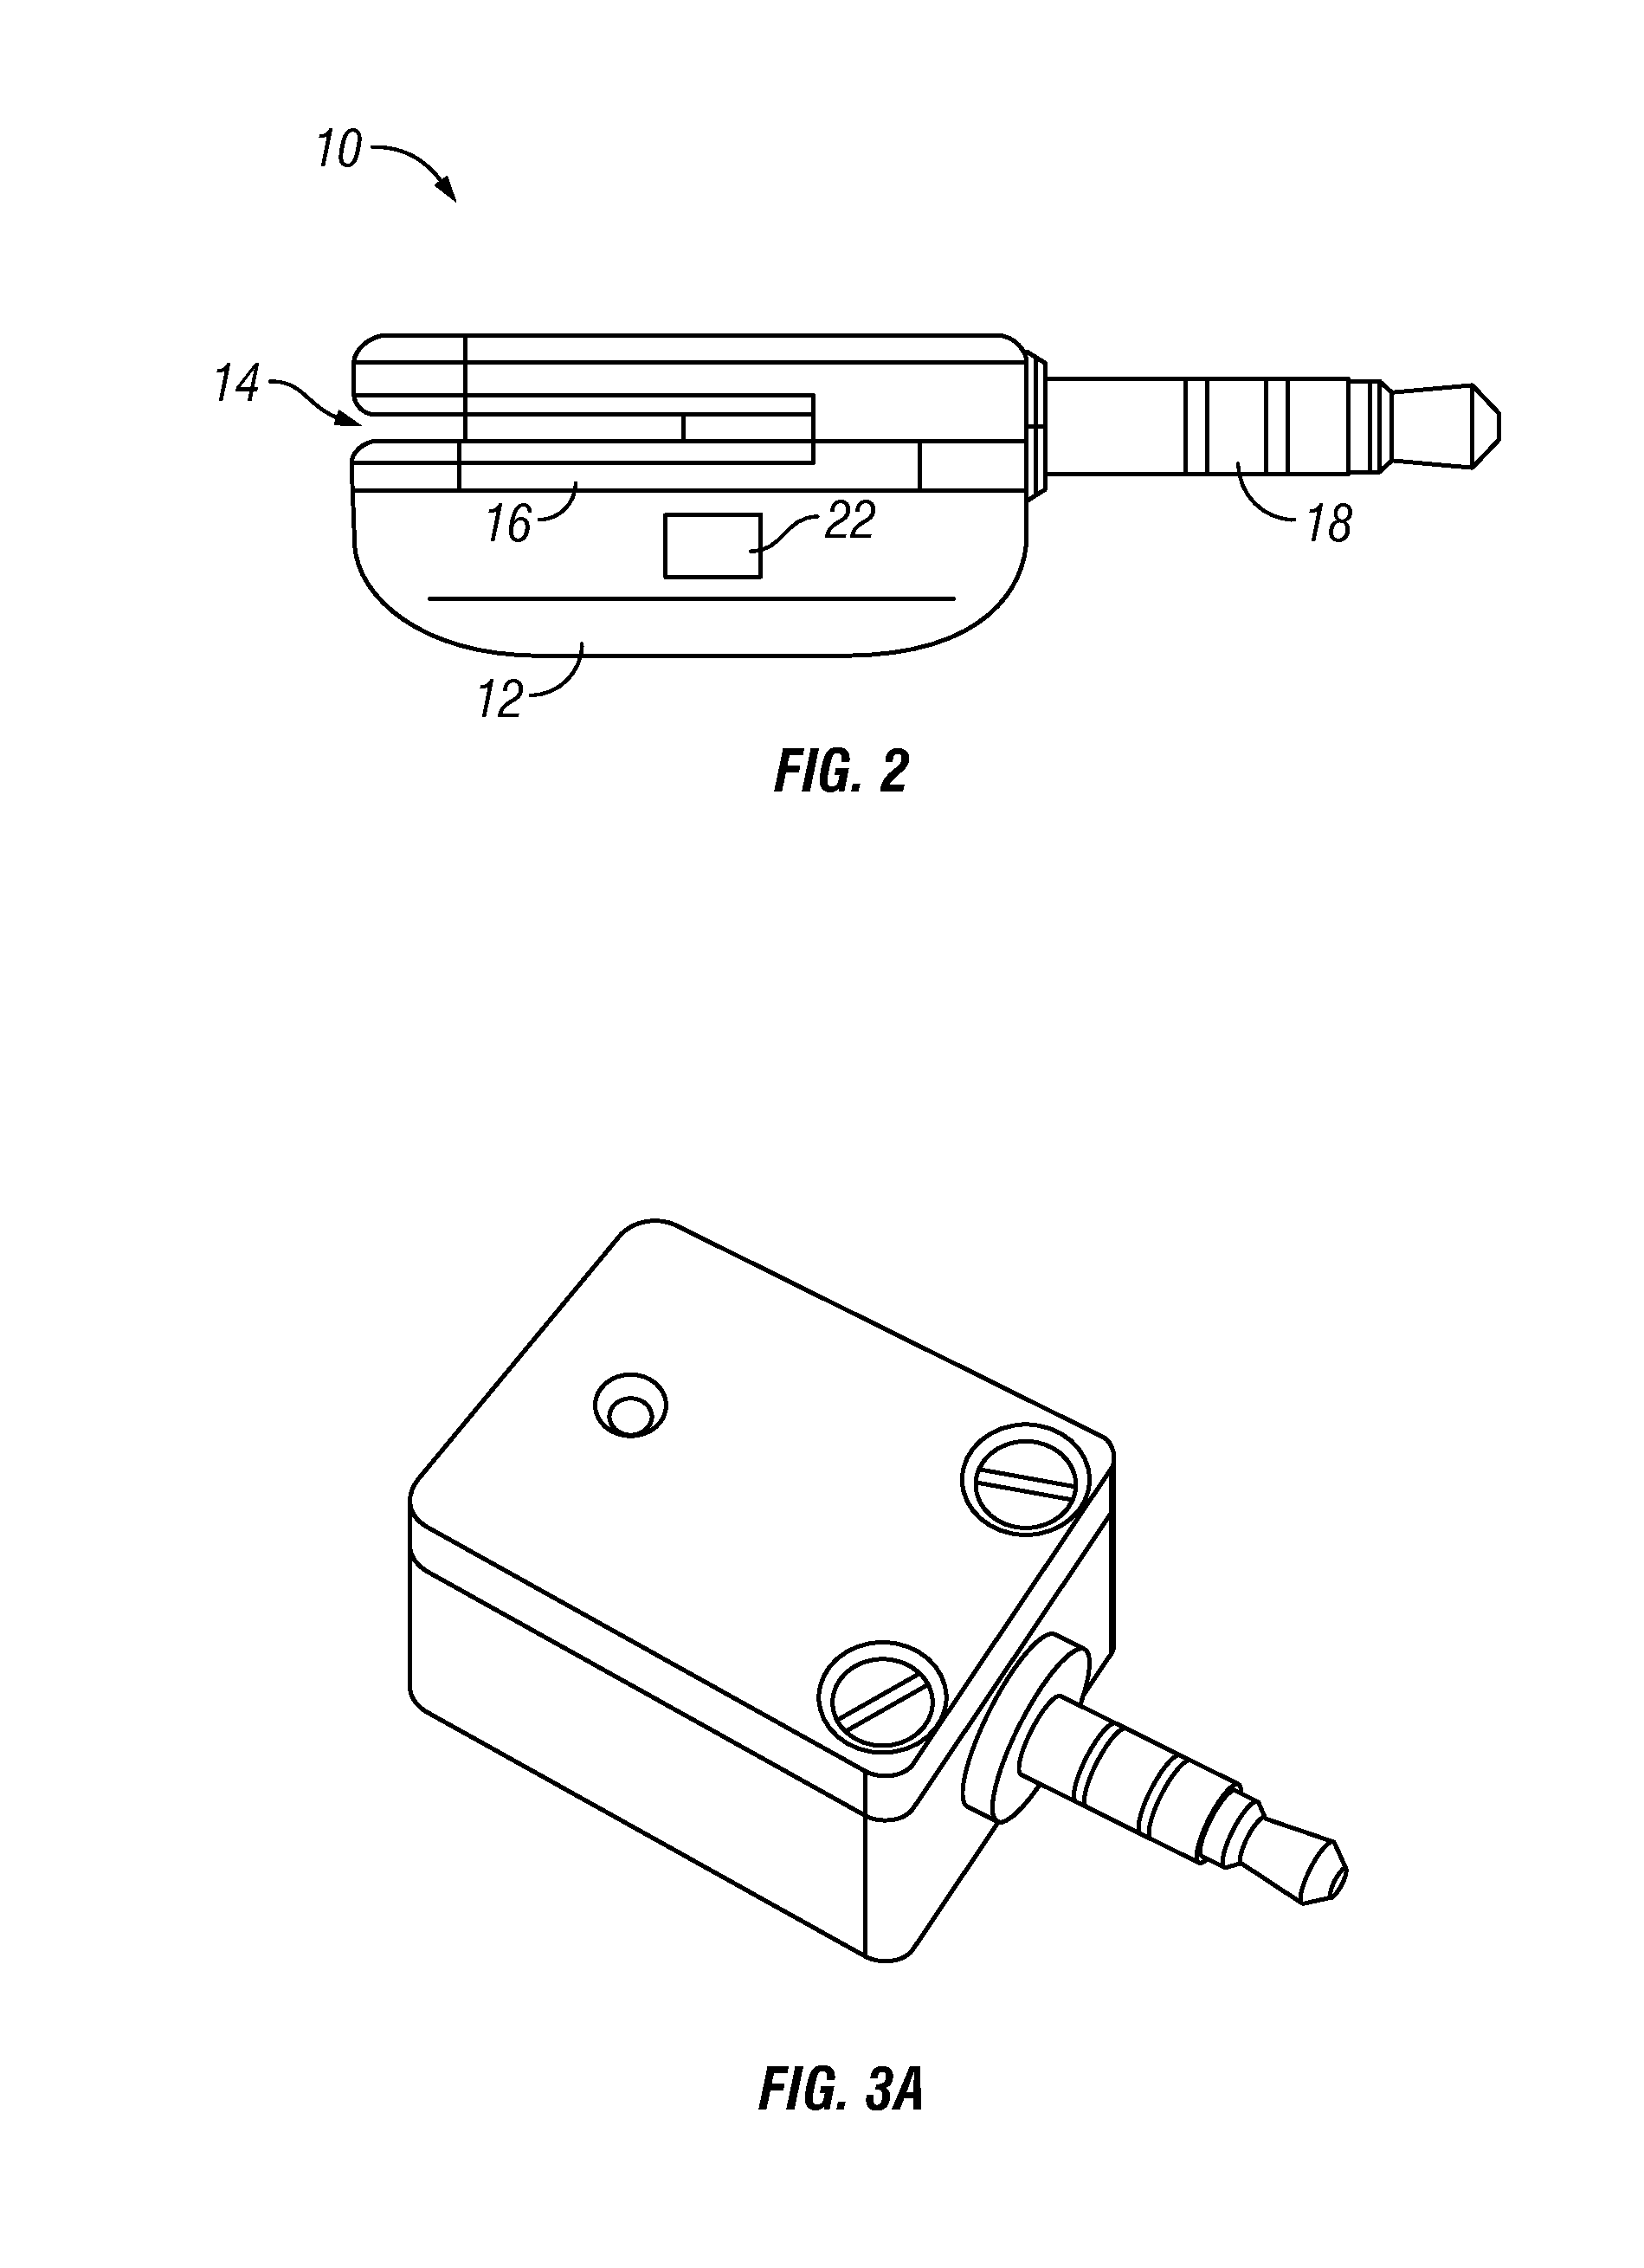 Method of transmitting information from a card reader with an asymmetric spring to a mobile device